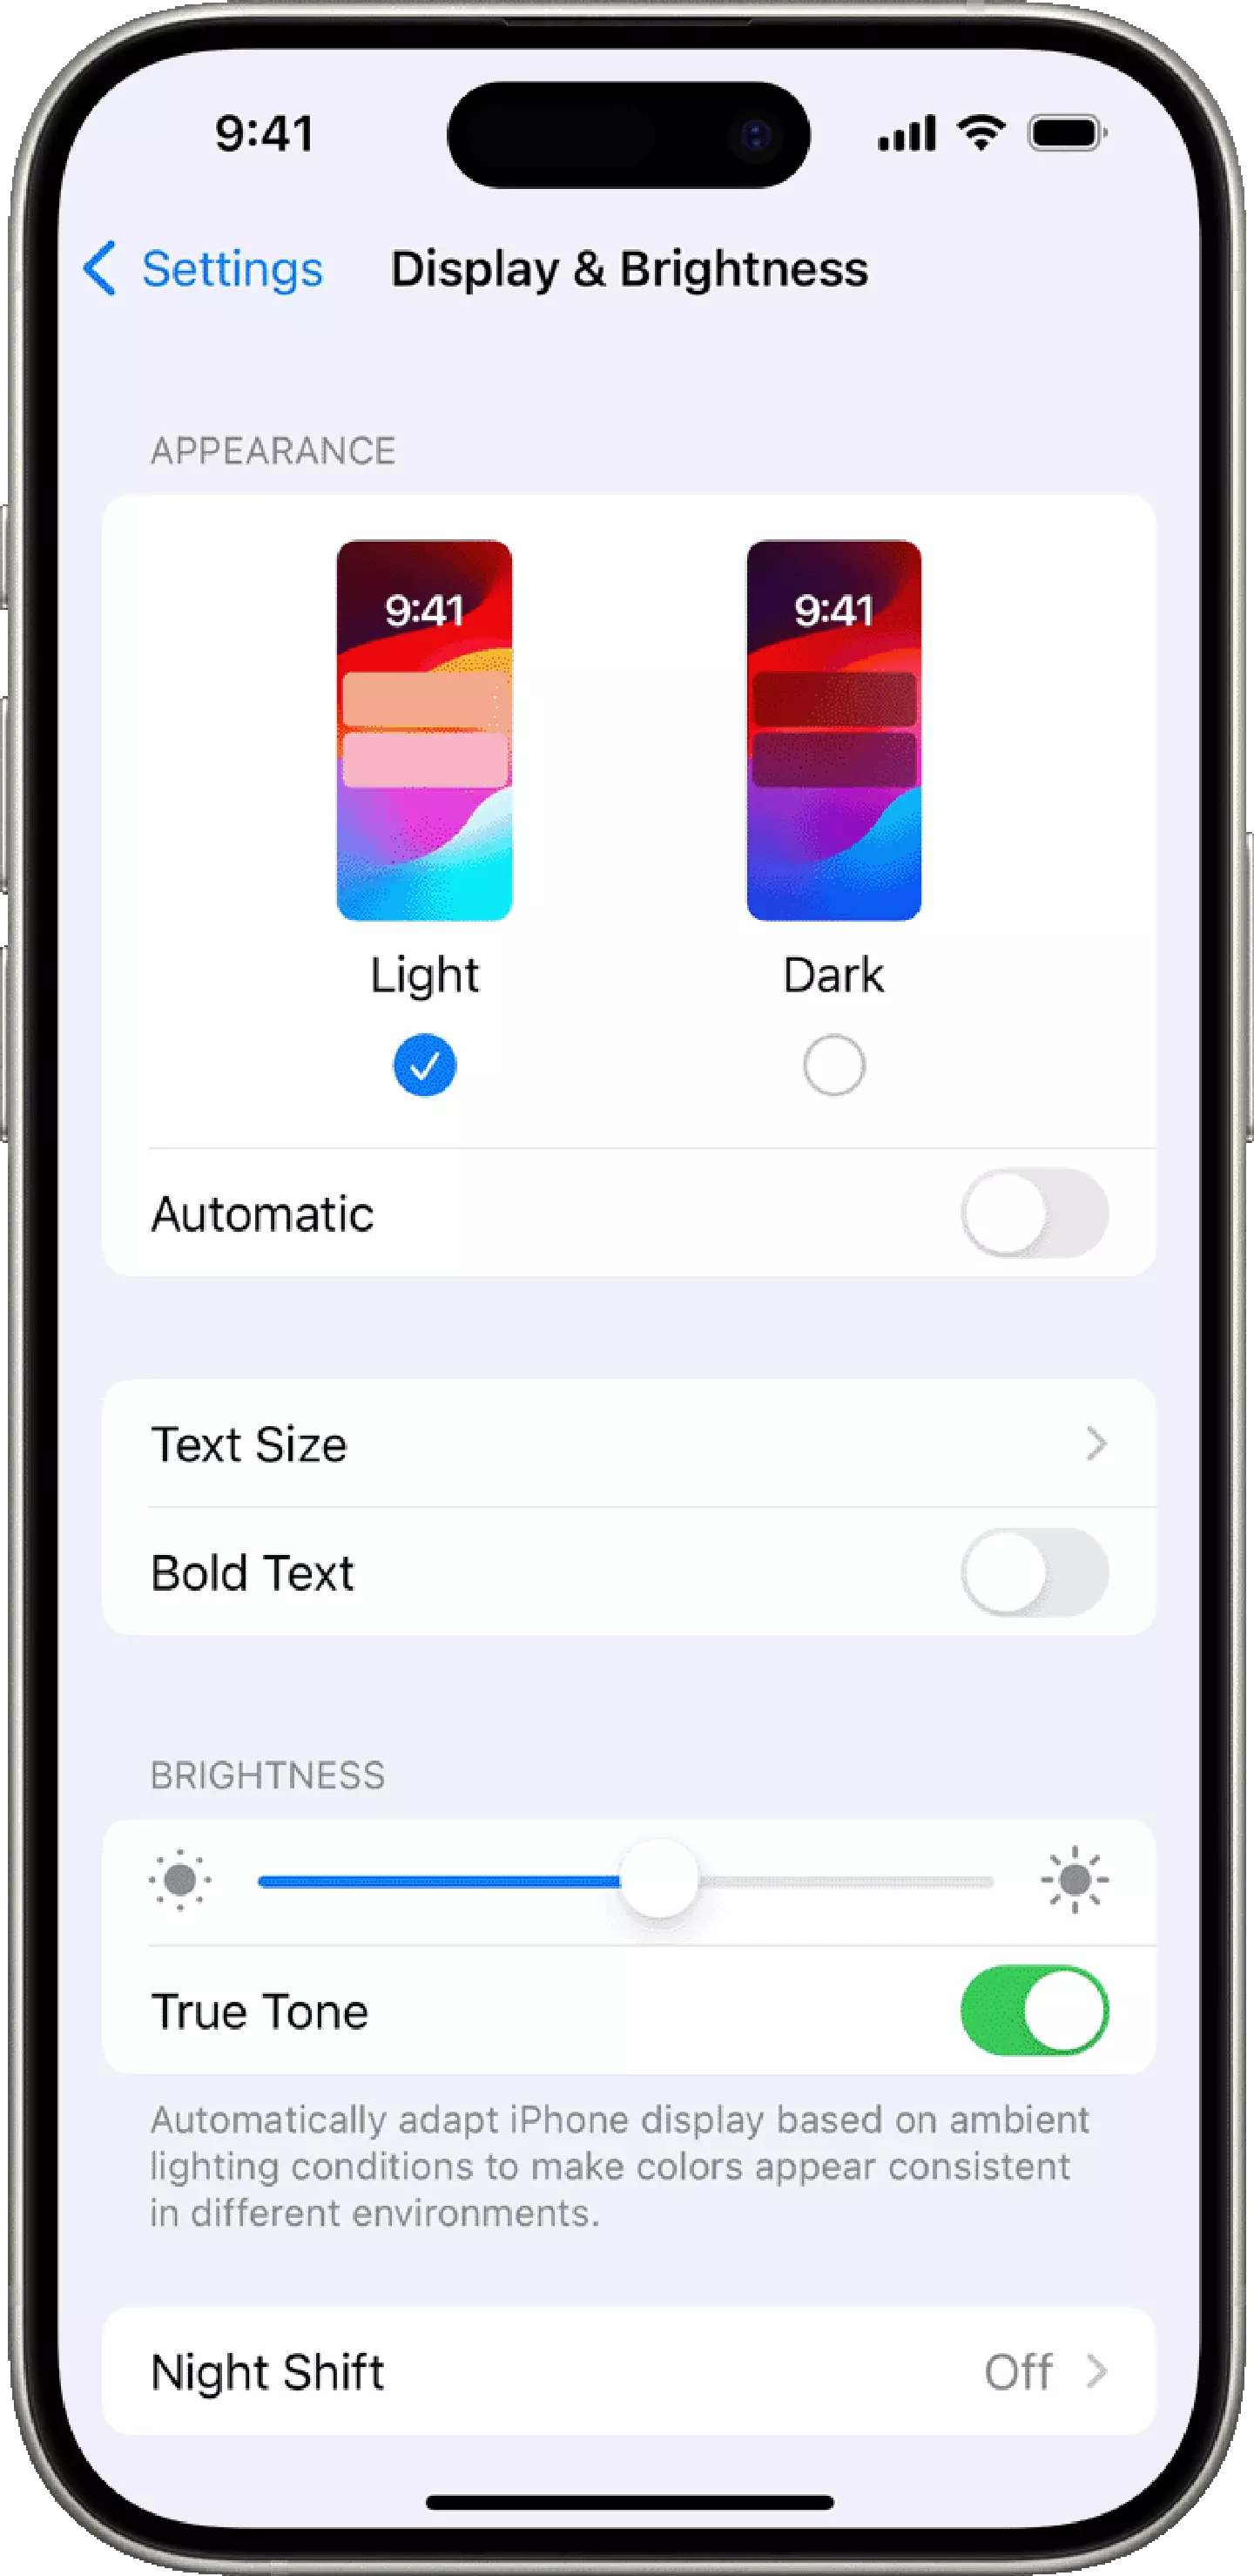 iPhones have light and dark mode.